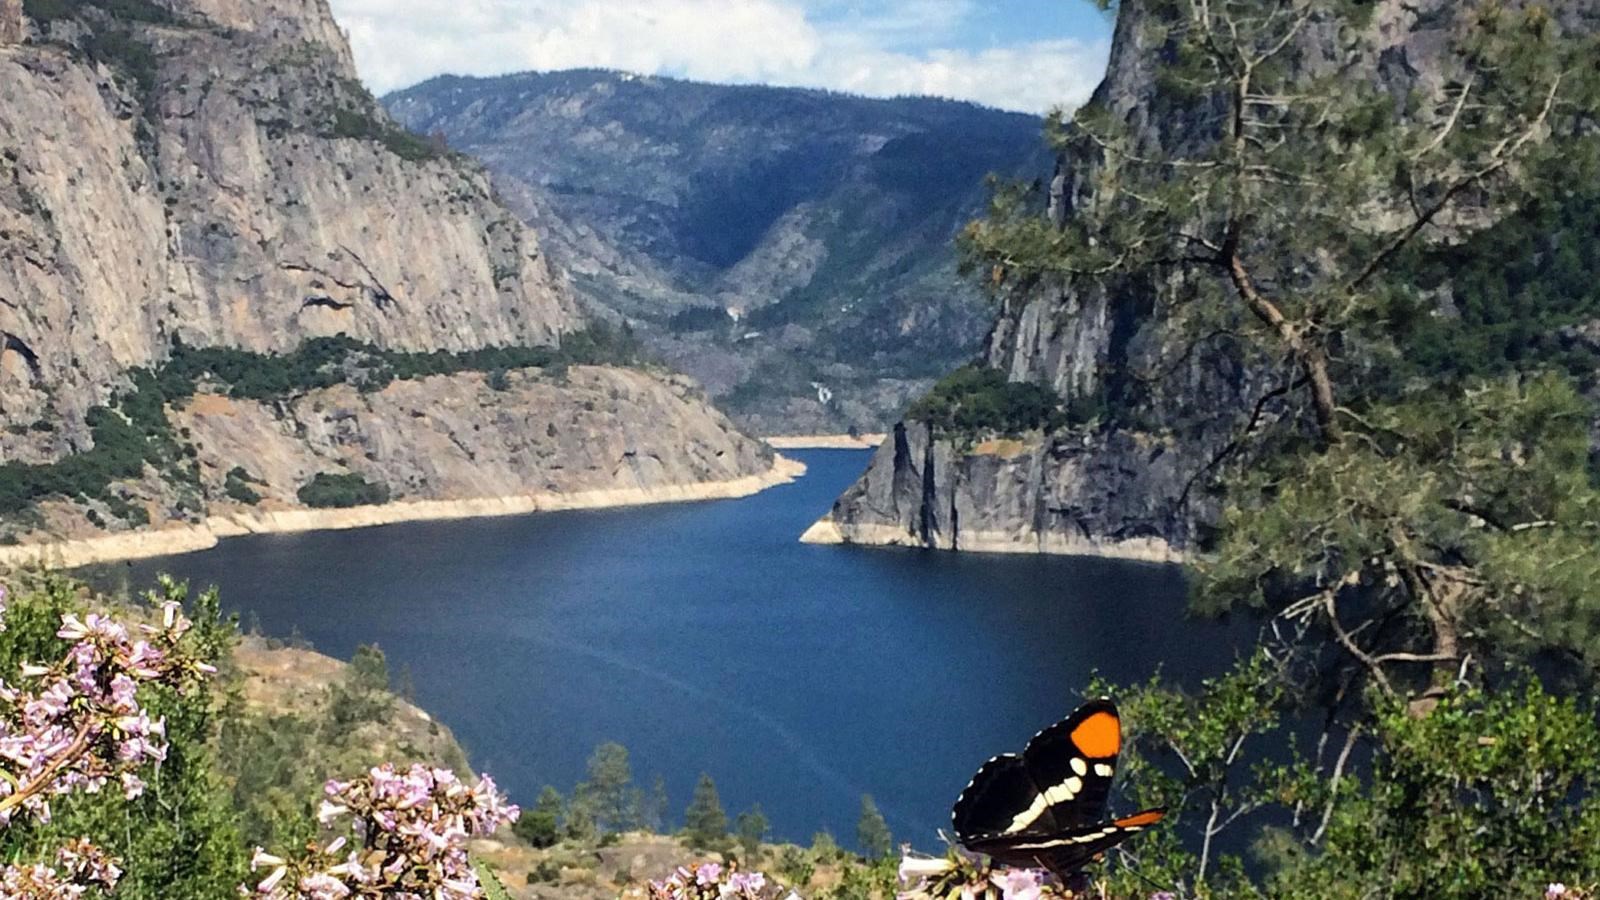 Reservoir with granite features on all sides, flowers and a butterfly in foreground